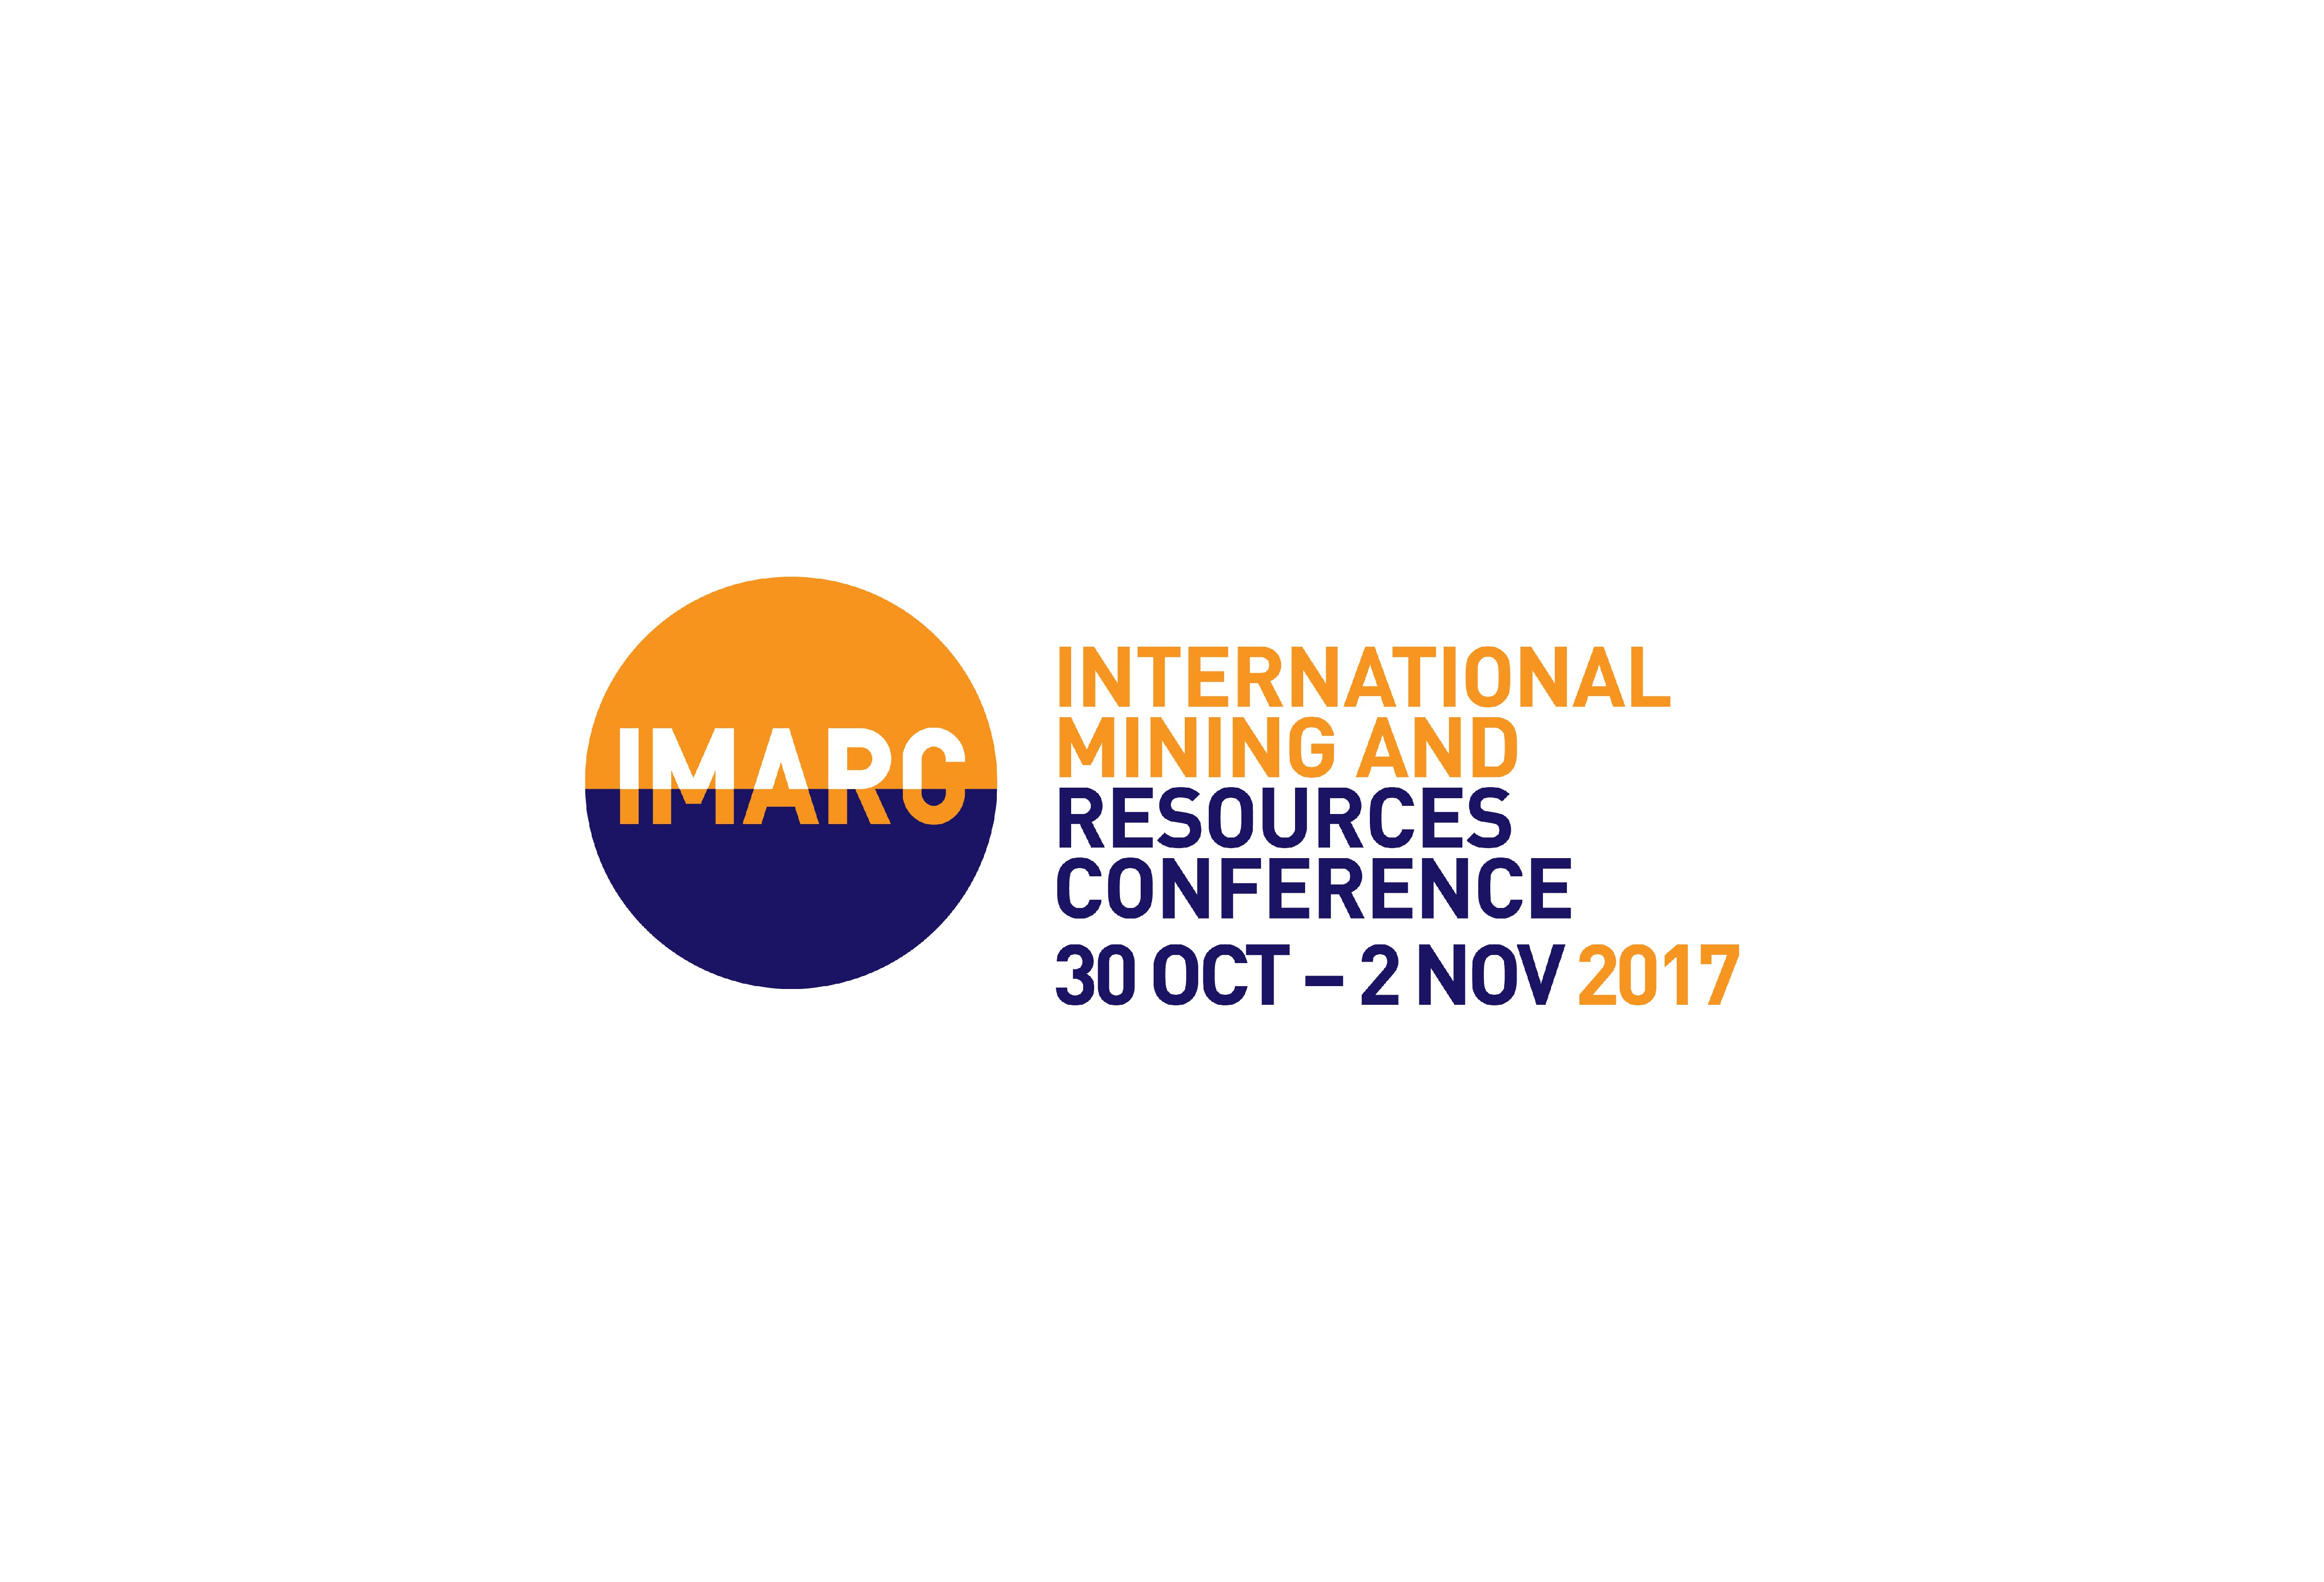 International Mining and Resources Conference (IMARC) is begining from 30 October to 2 November 2017